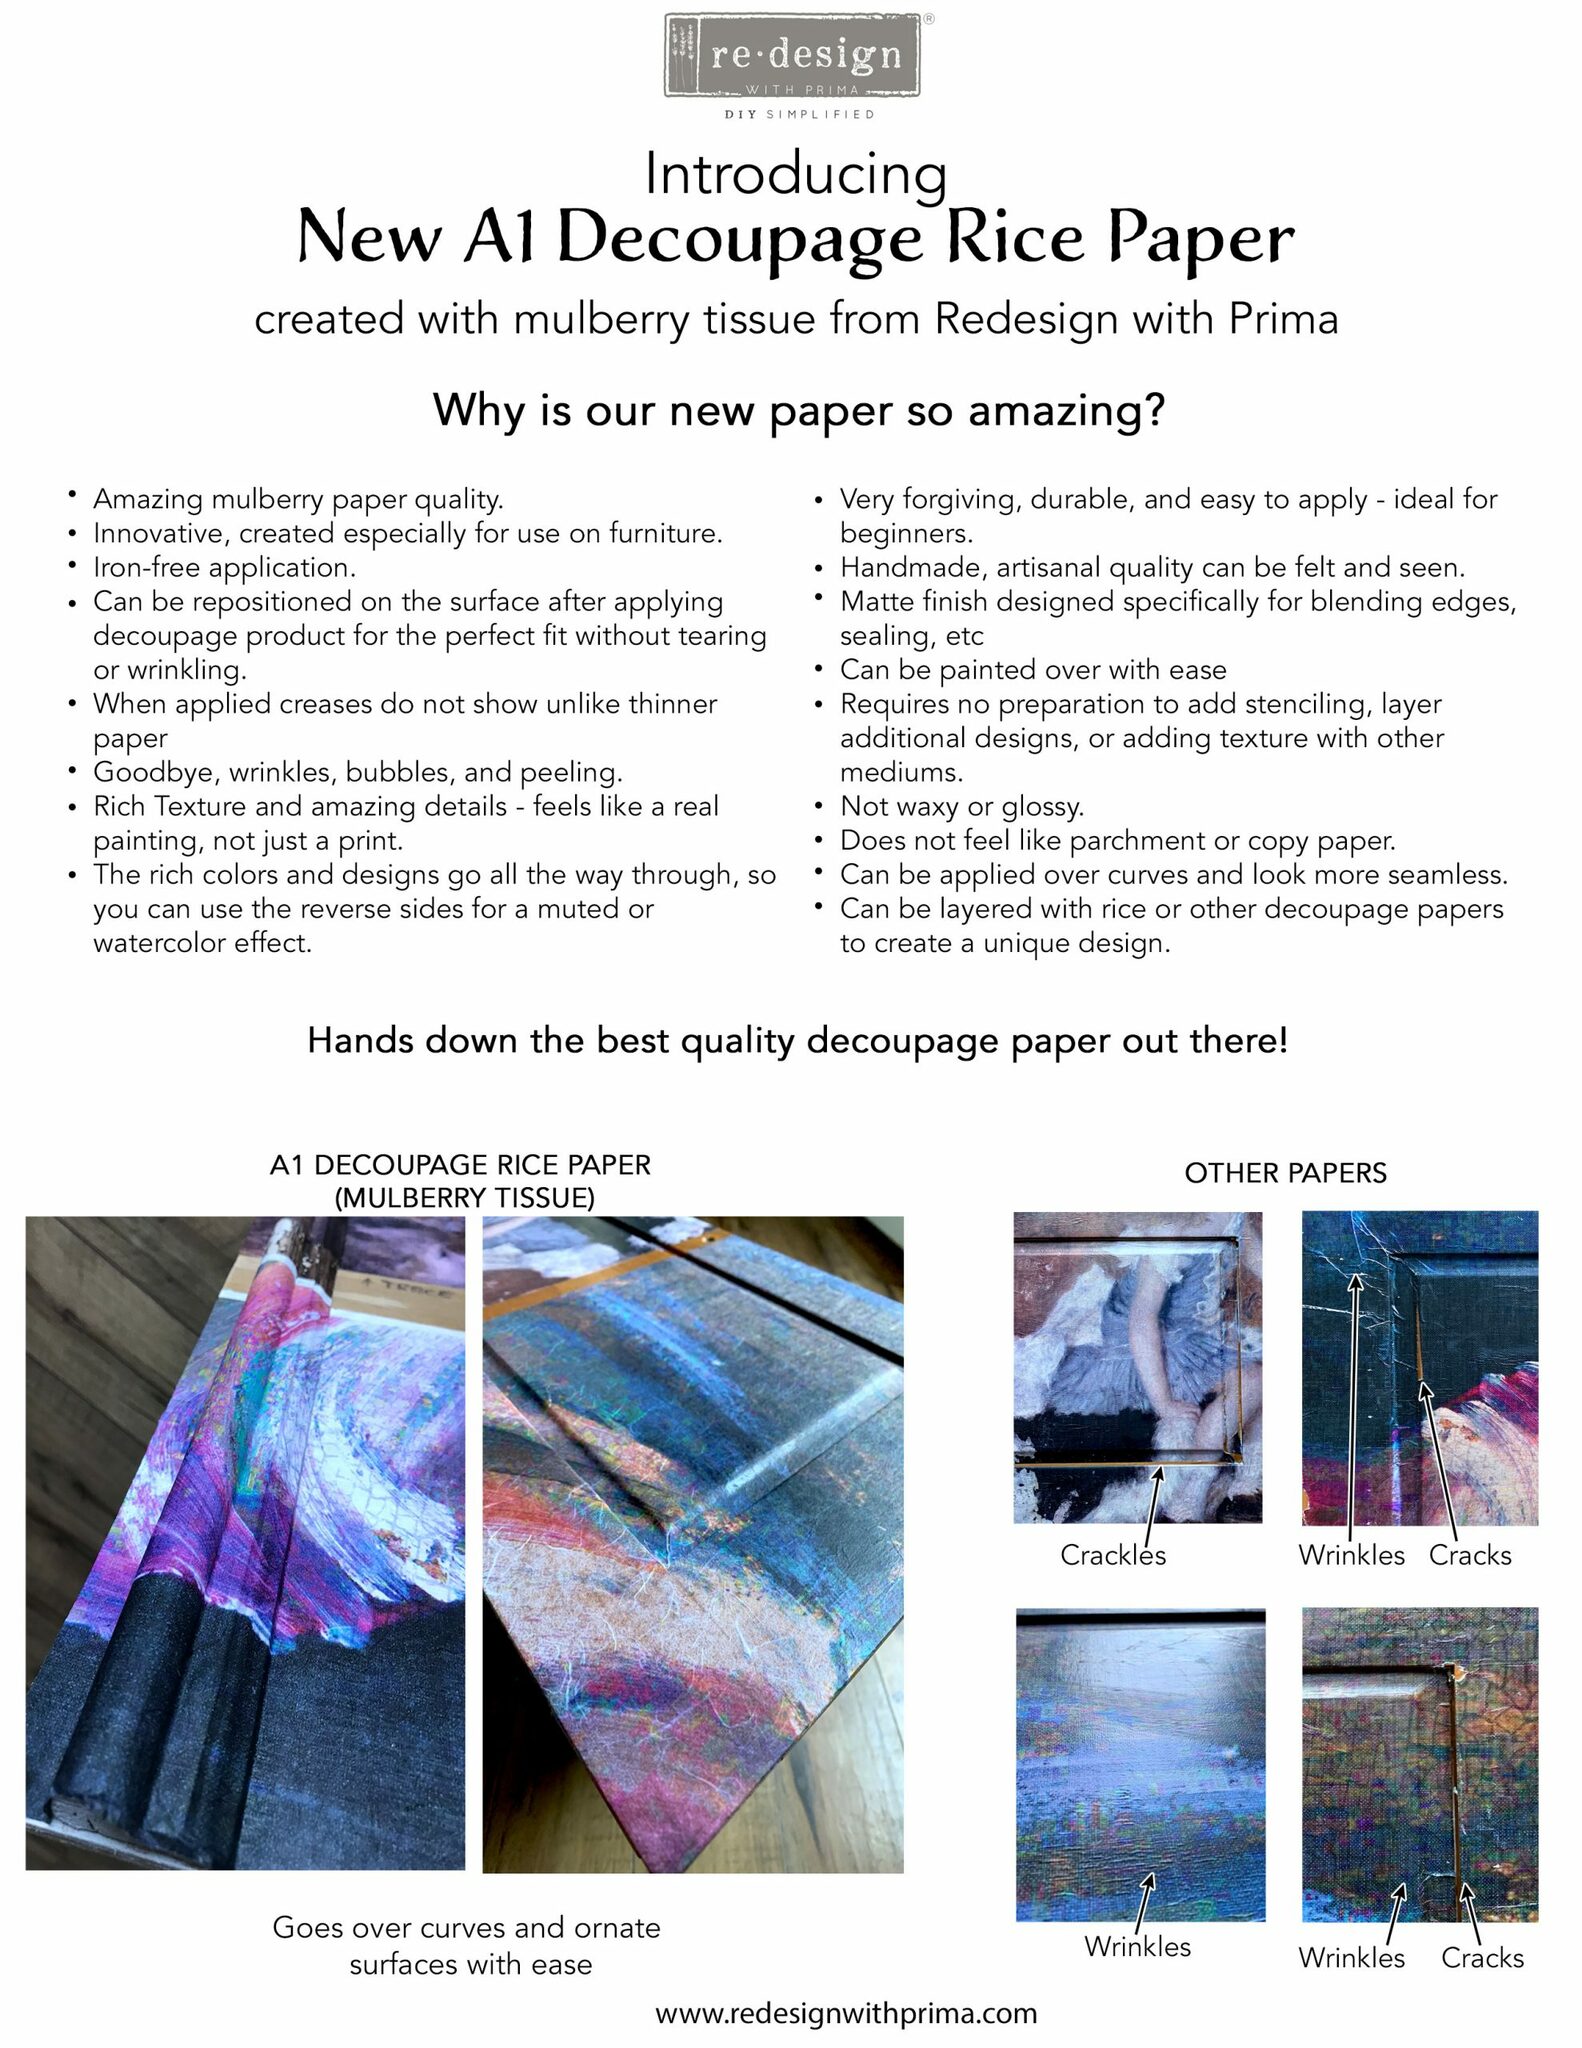 DECOUPAGE - Re Design Tissue Paper A1 - In Deep Forest